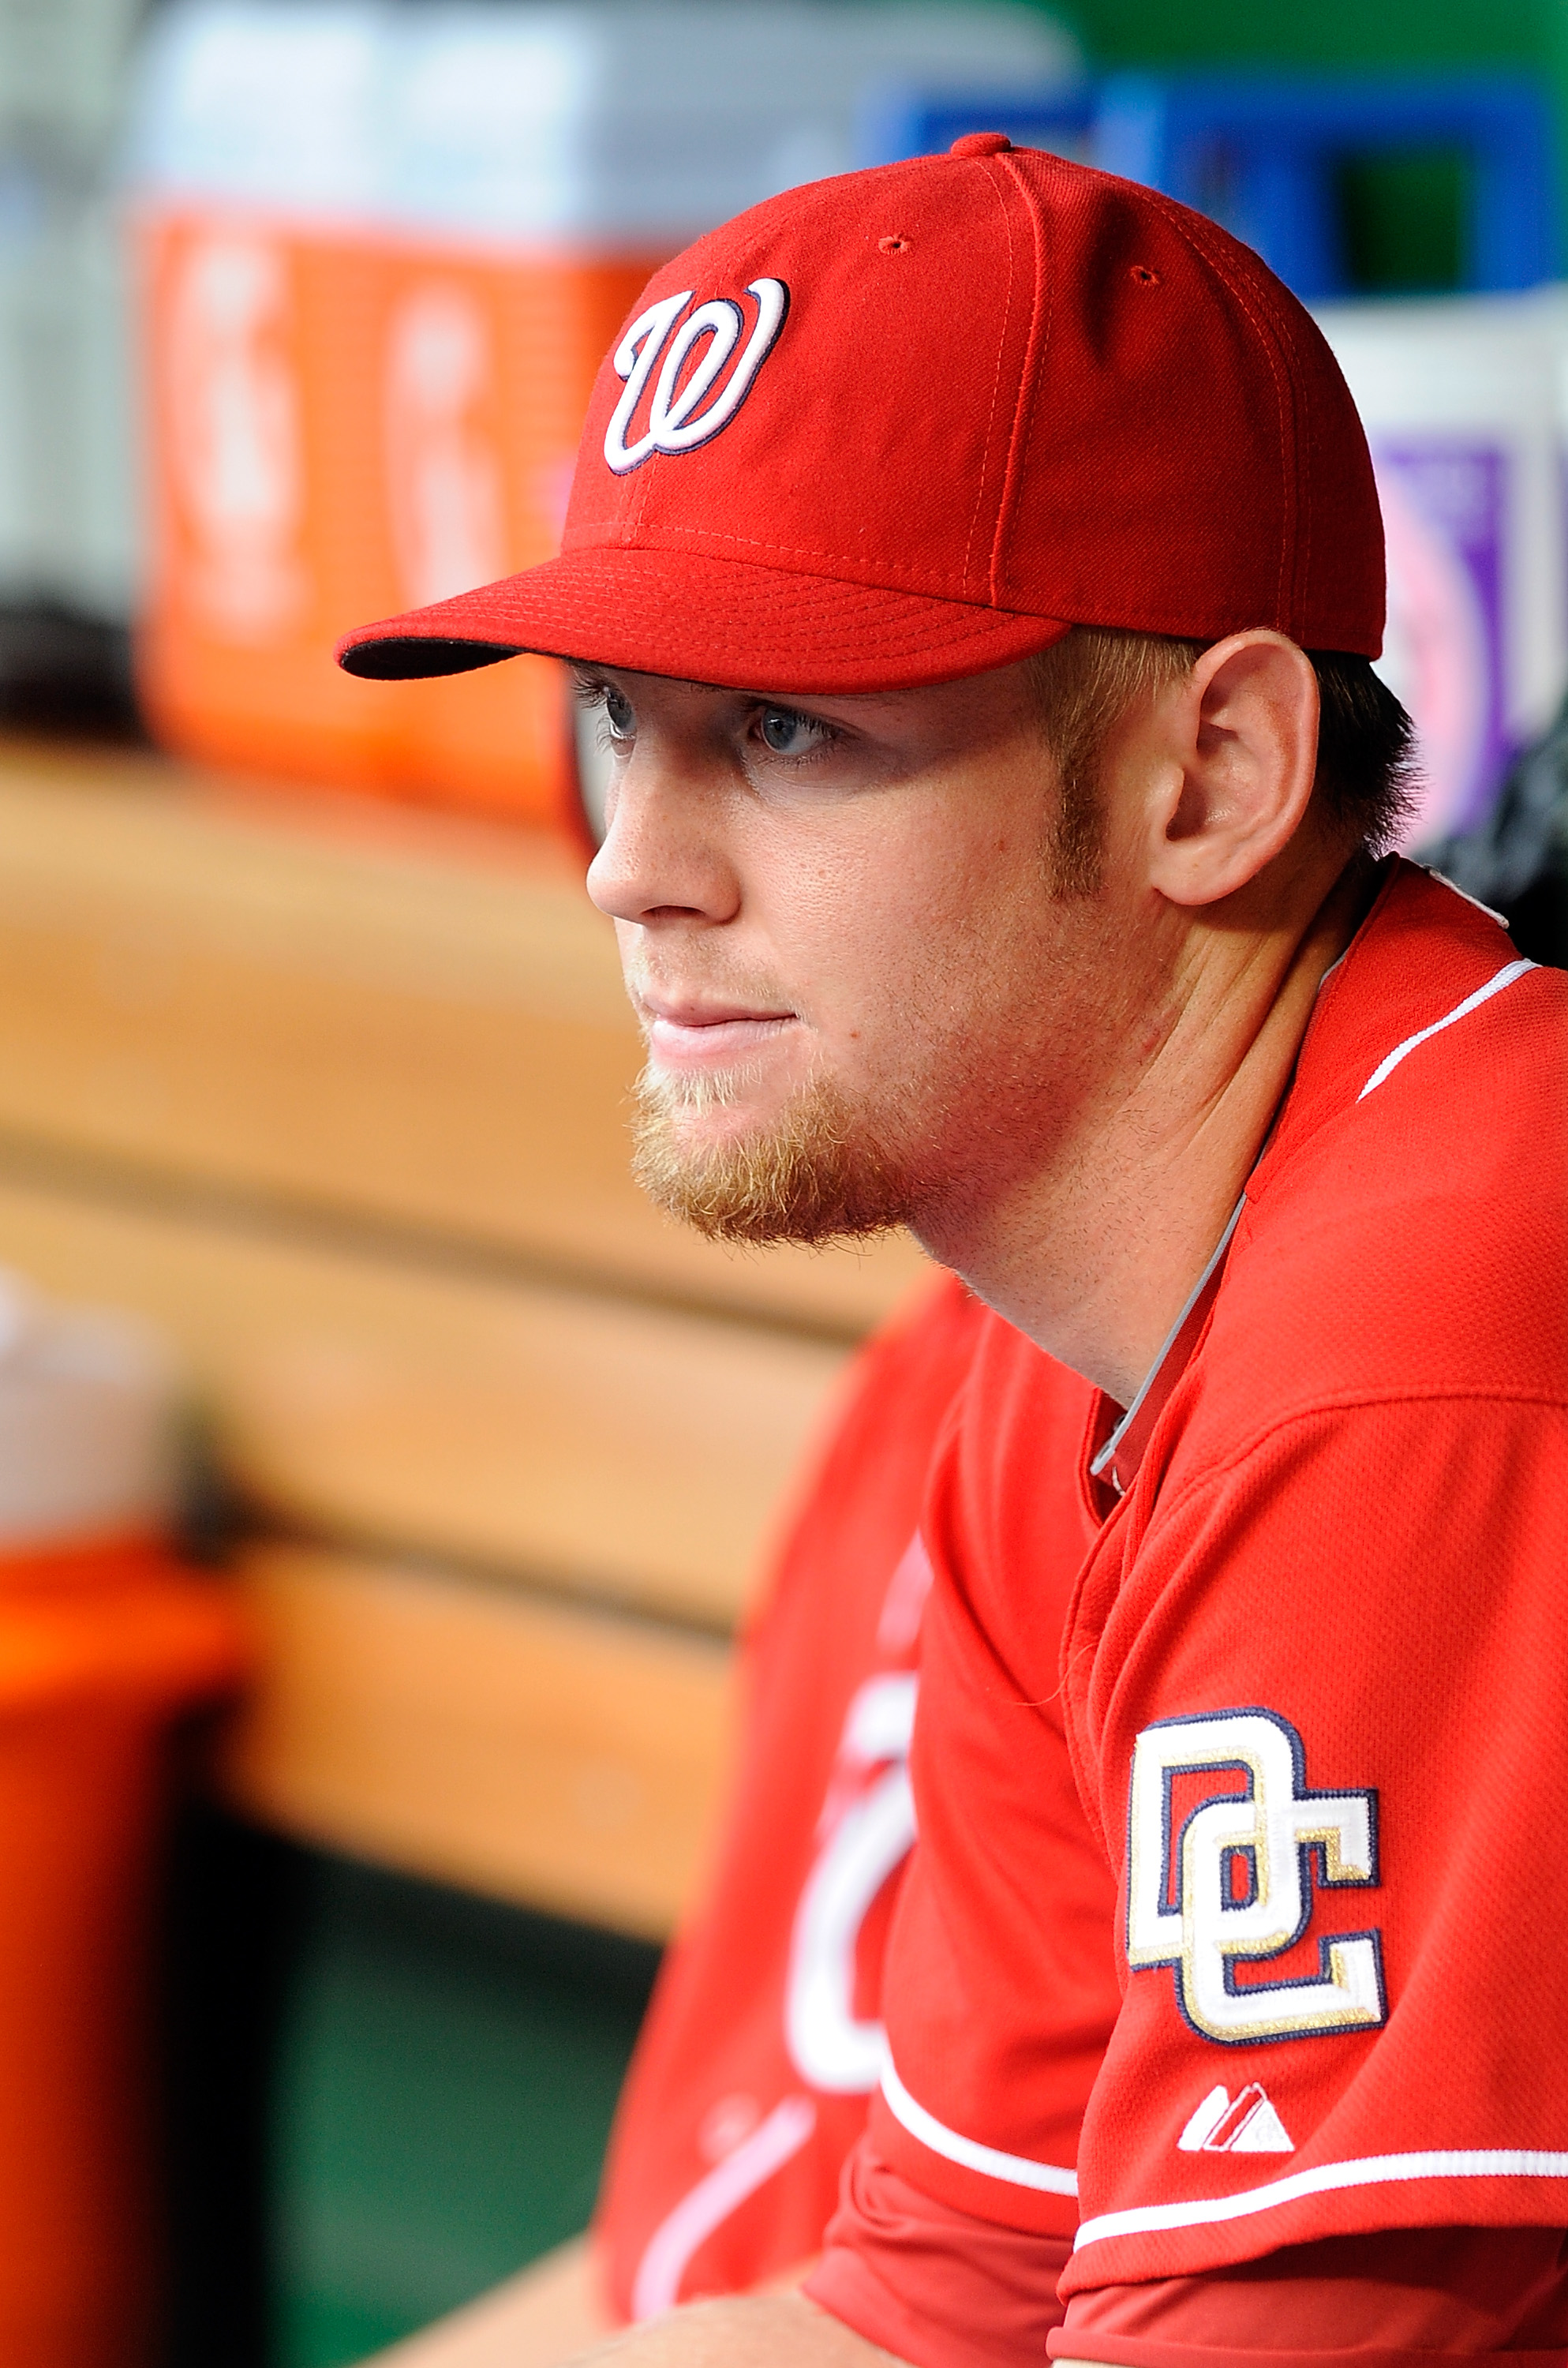 WASHINGTON - JULY 29:  Stephen Strasburg #37 of the Washington Nationals watches the game against the Atlanta Braves at Nationals Park on July 29, 2010 in Washington, DC.  (Photo by Greg Fiume/Getty Images)